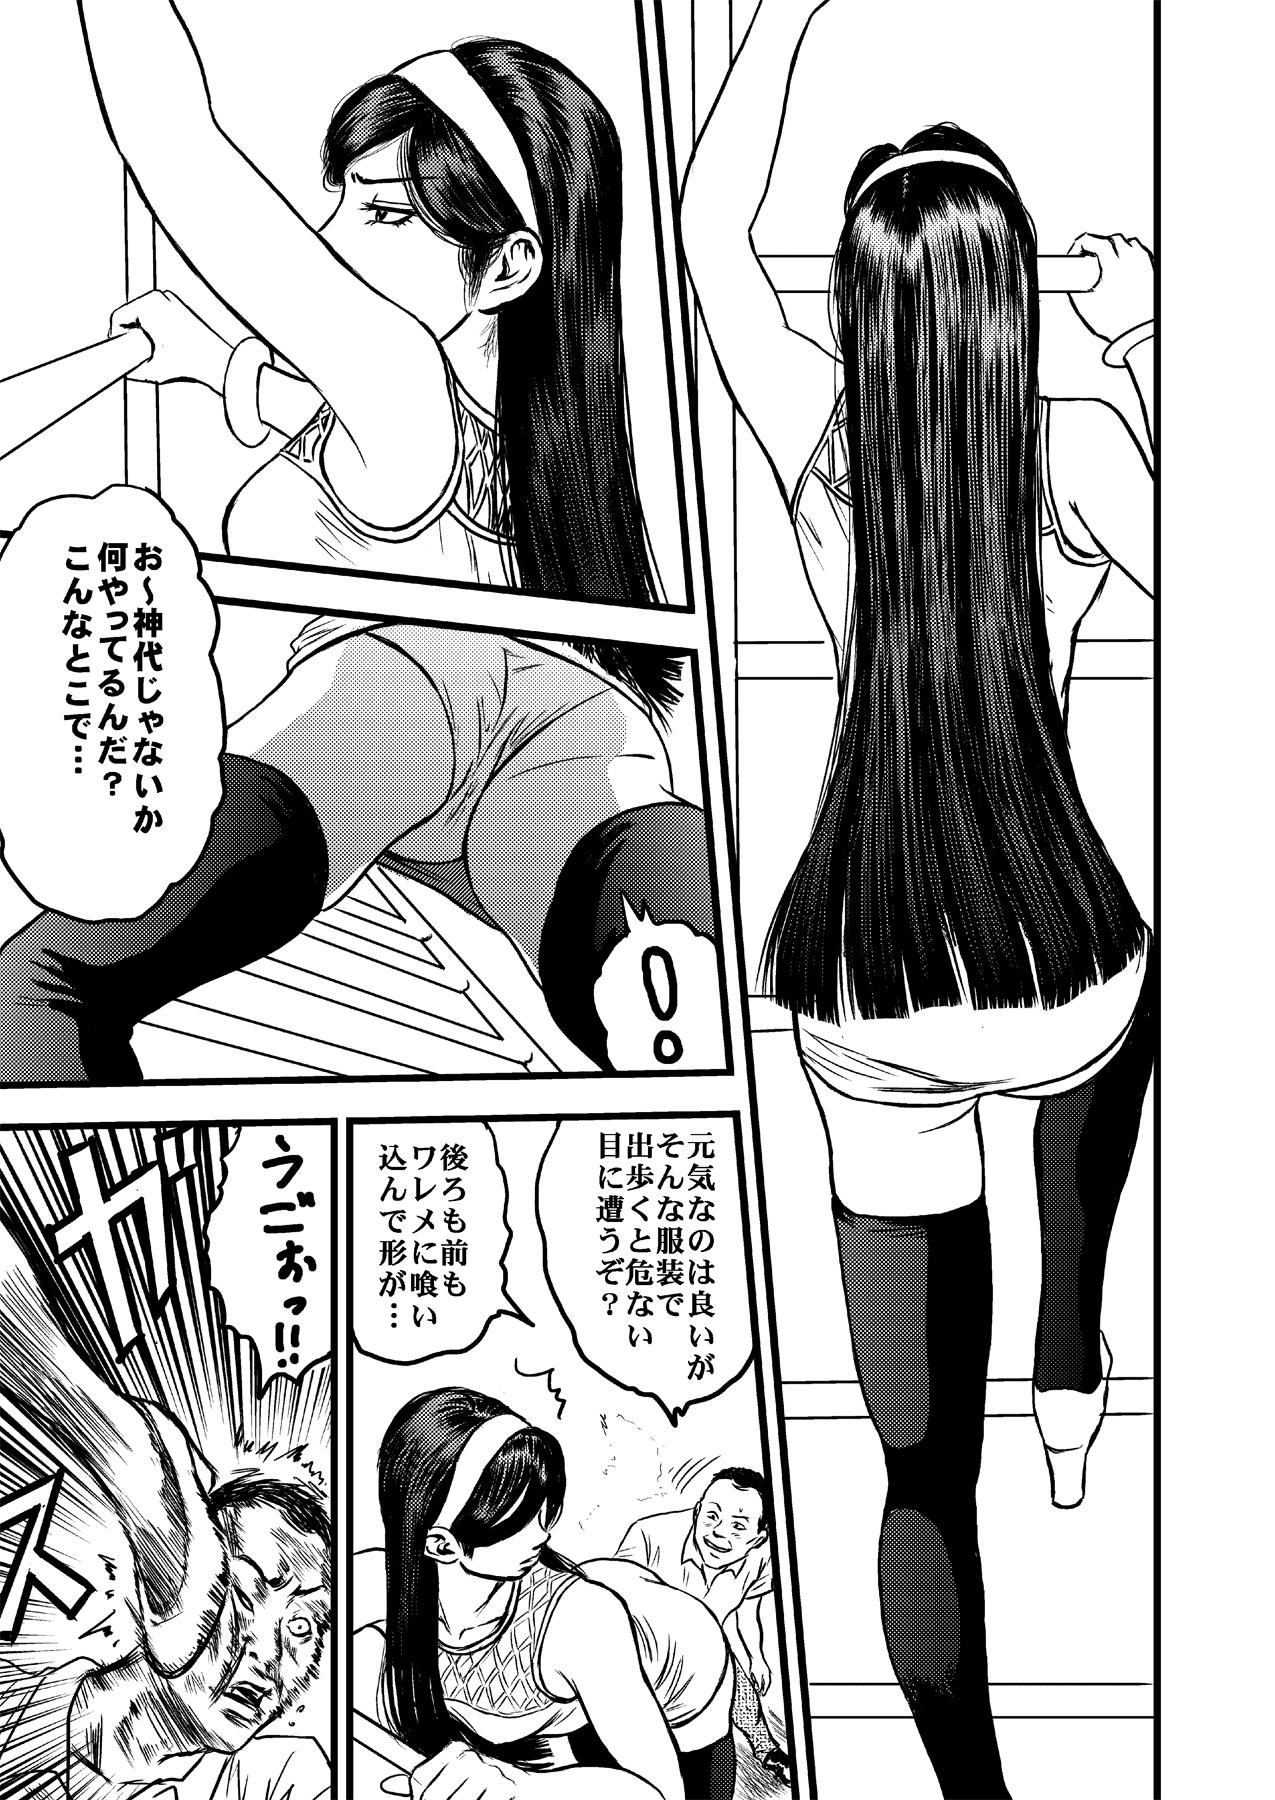 Webcams Occult Ojousama no Yuuutsu - Occult academy Wank - Page 5